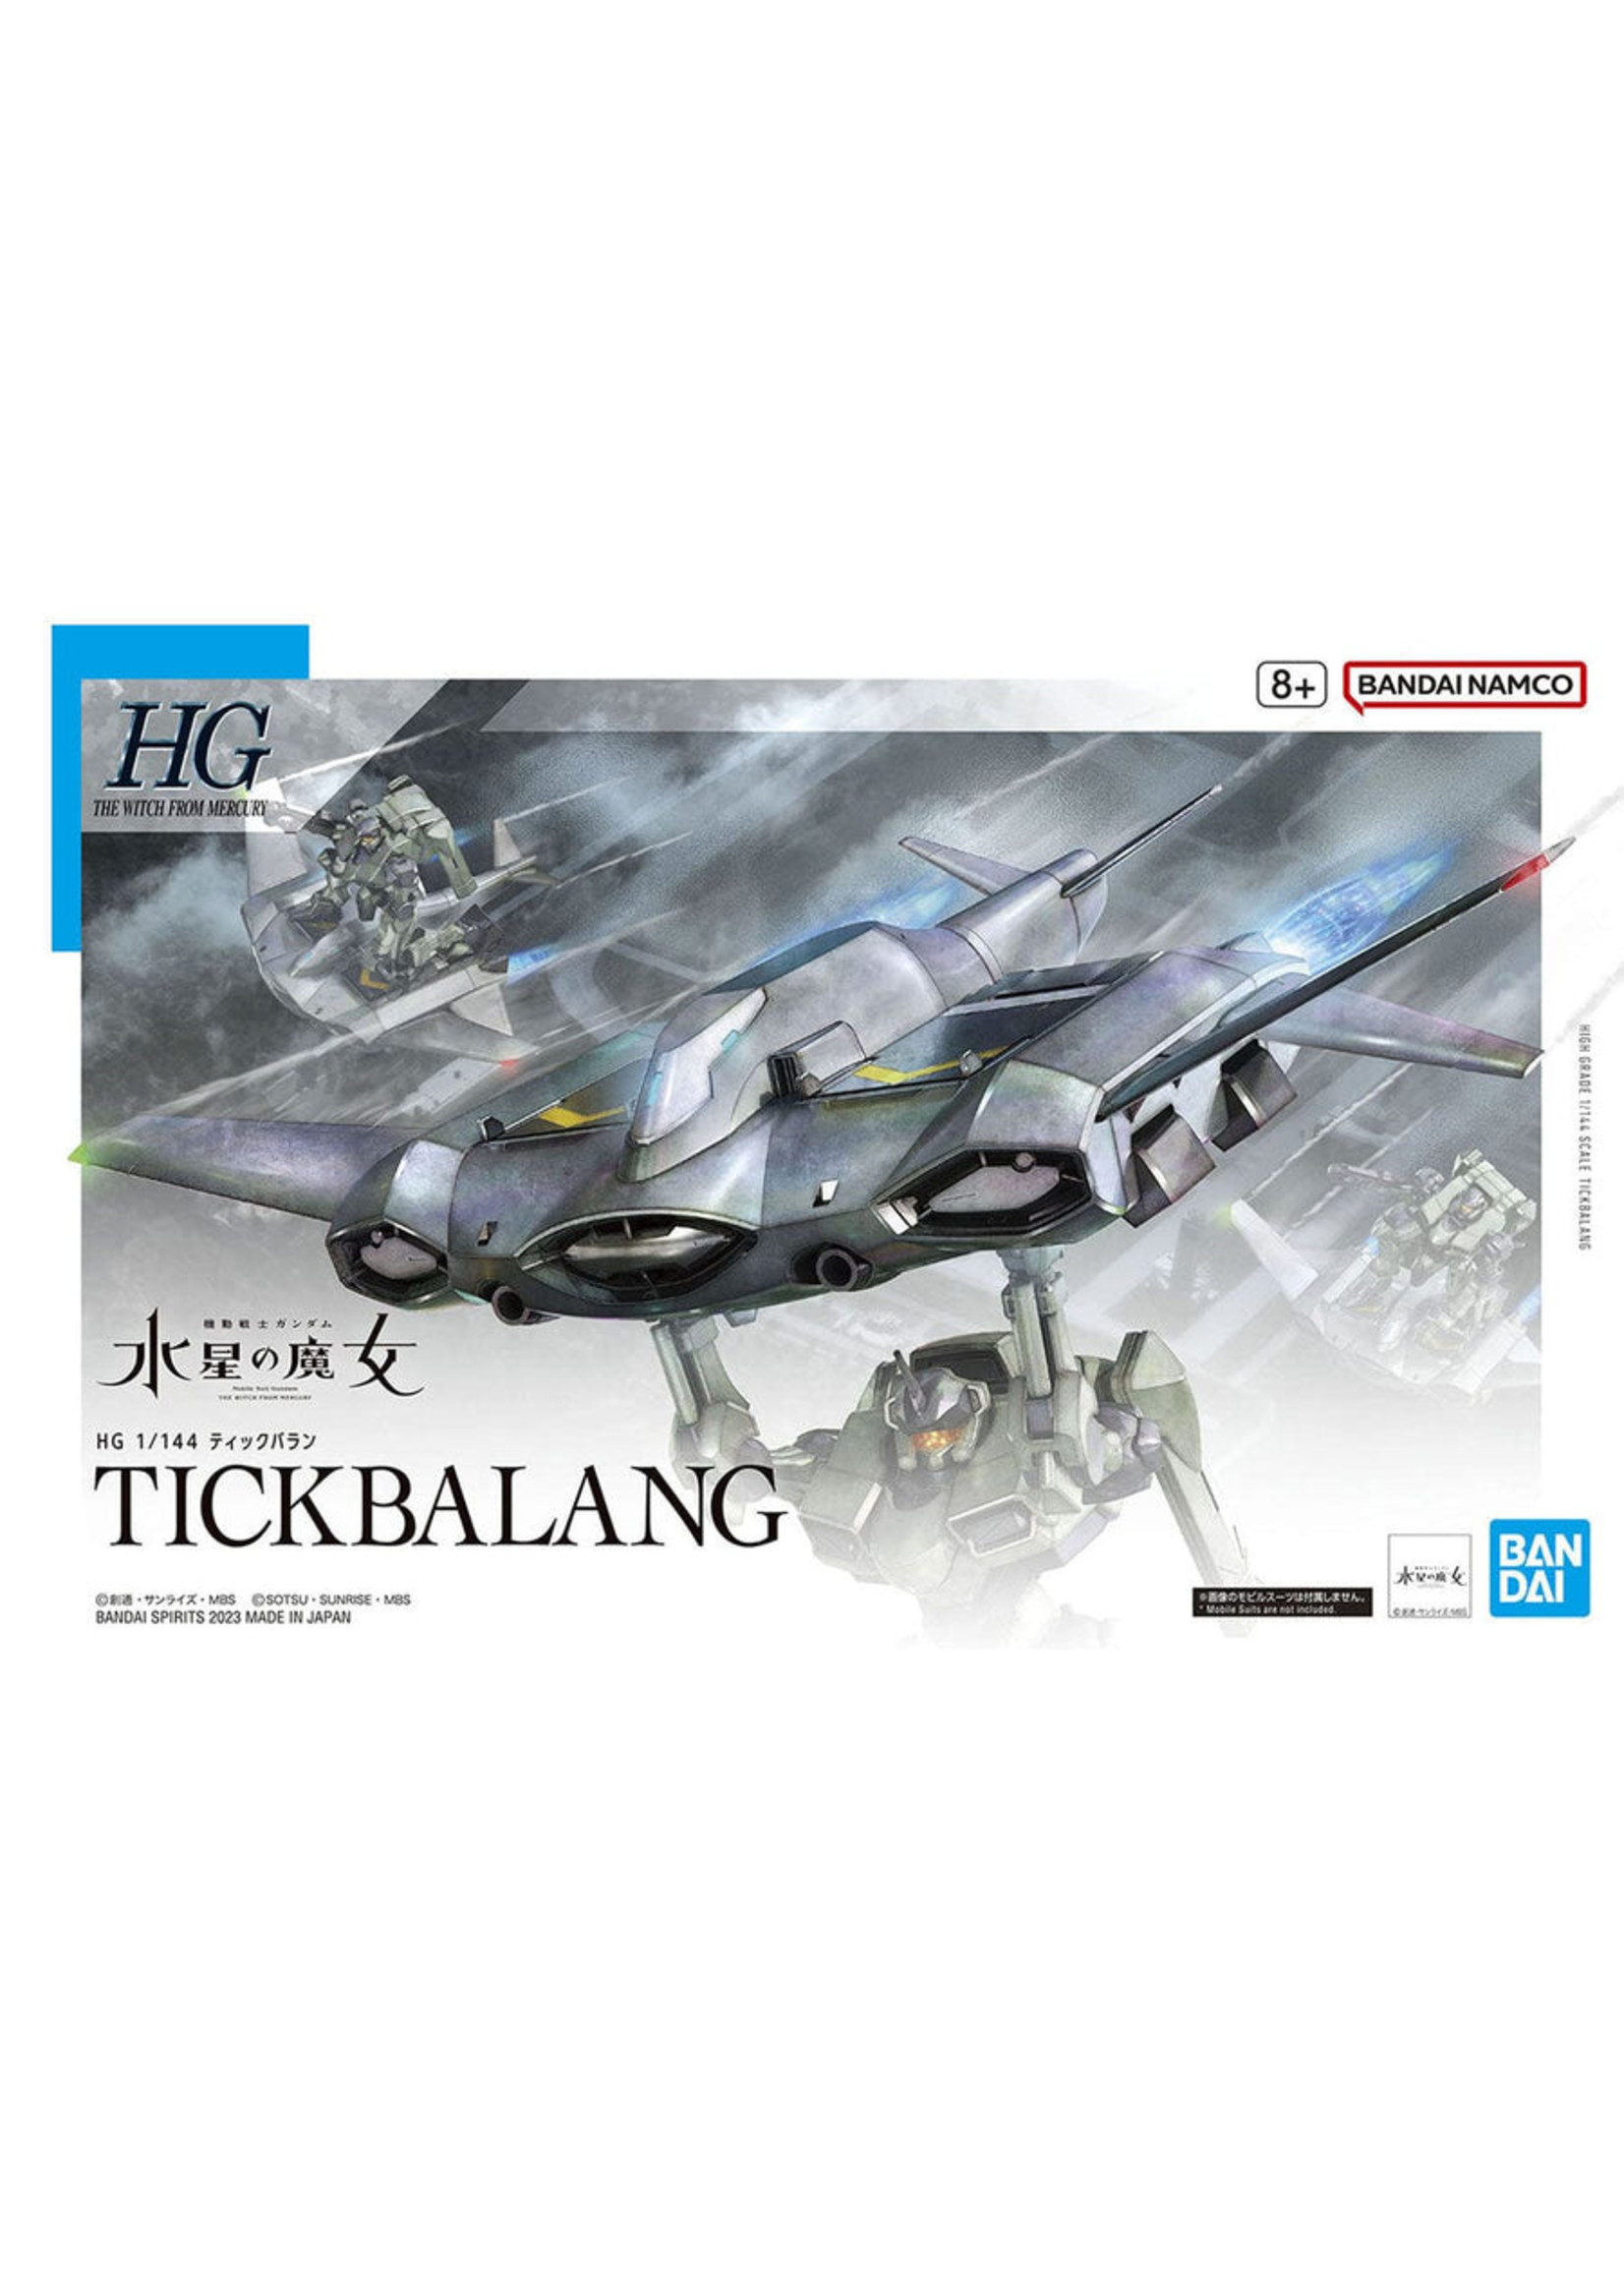 Bandai #15 "The Witch From Mercury" Tickbalang